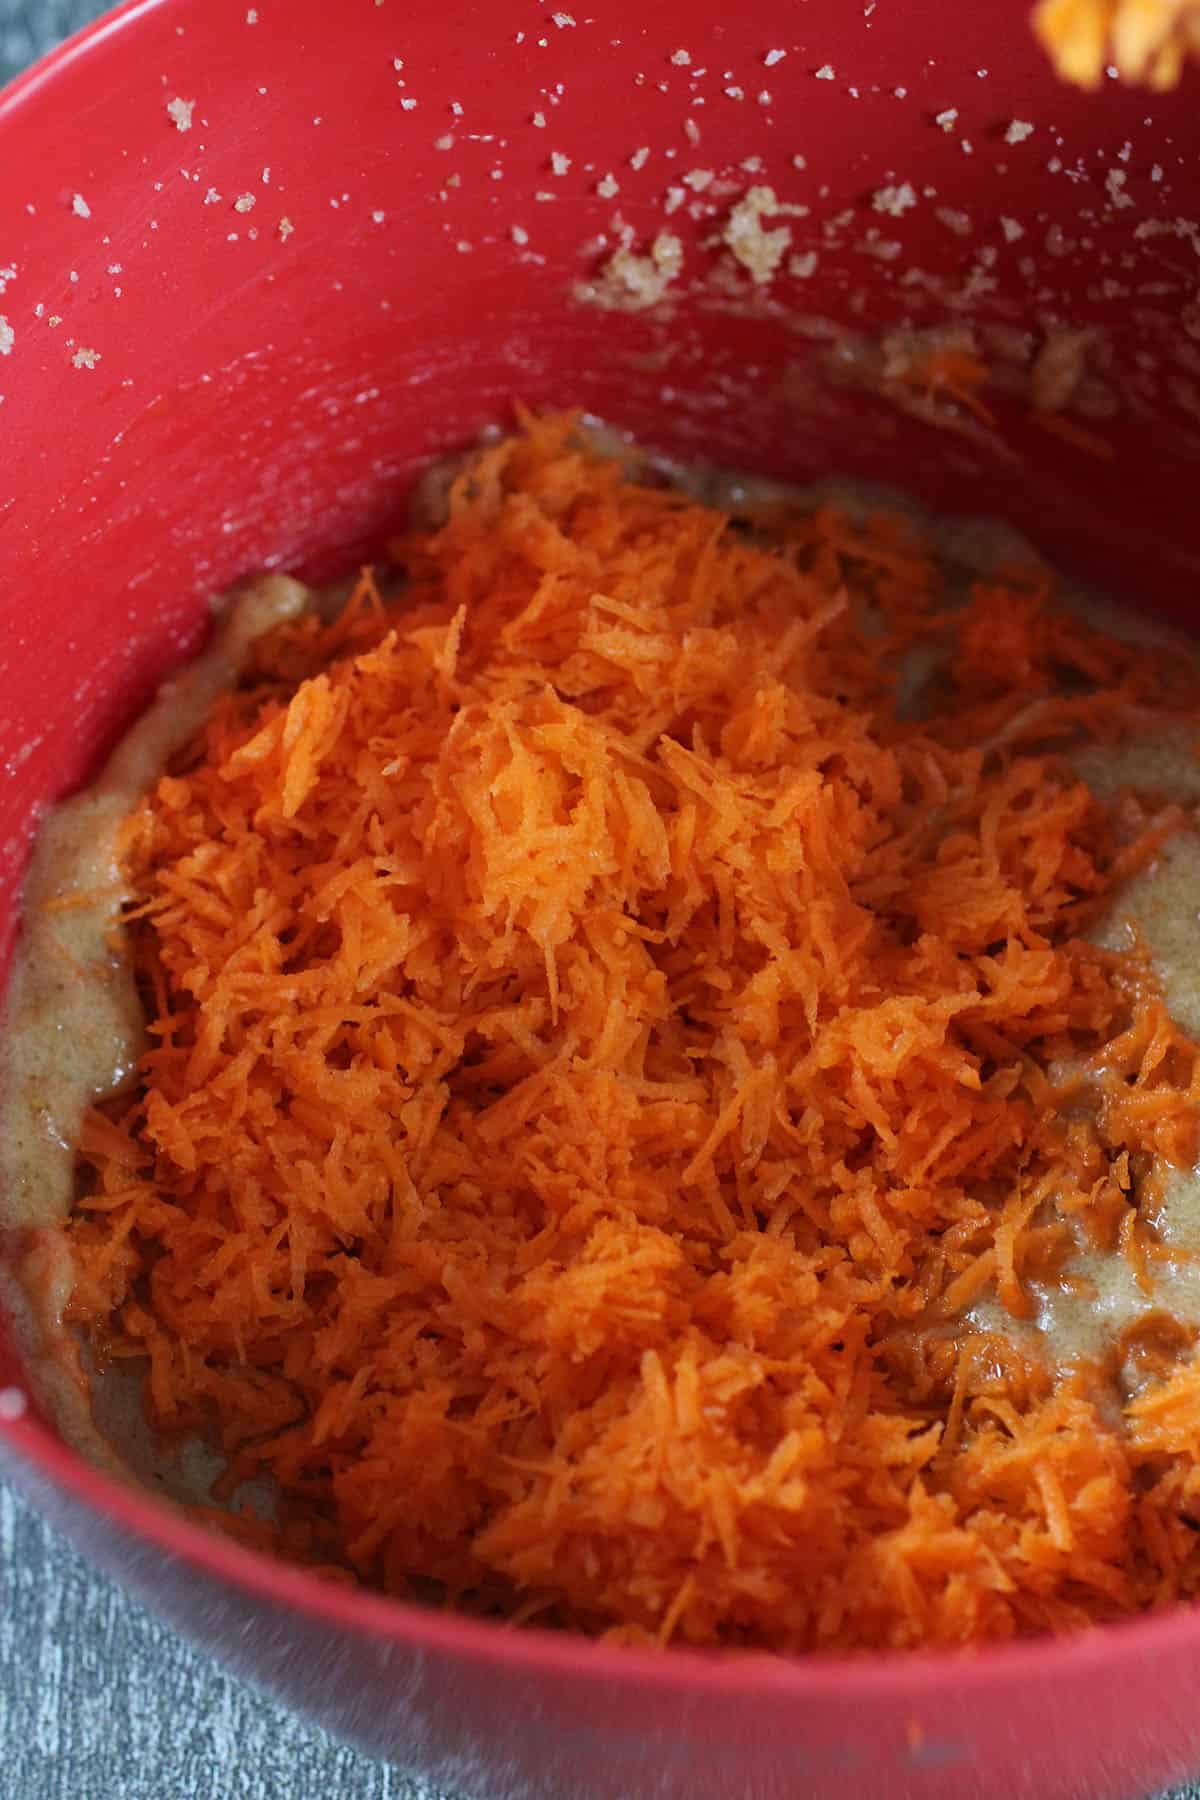 The grated carrots added to the cake batter.